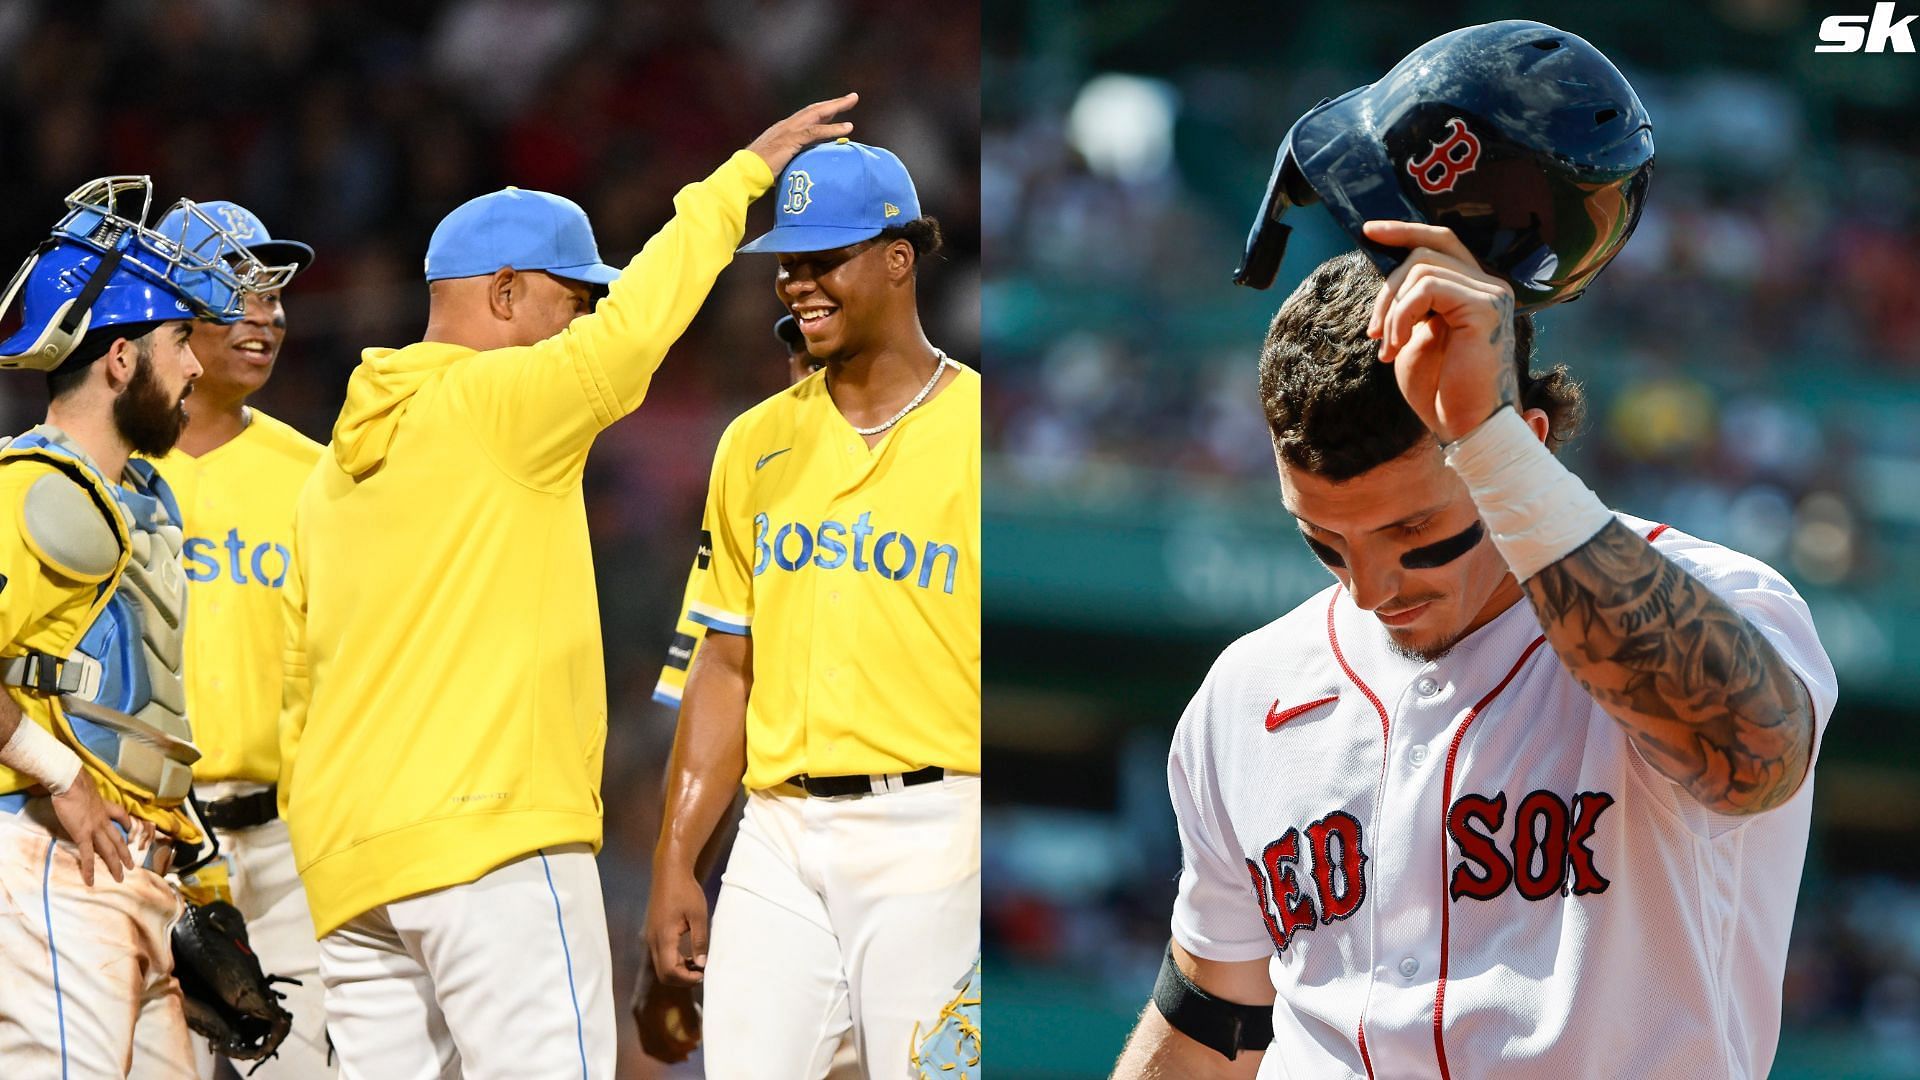 red sox blue and gold uniforms